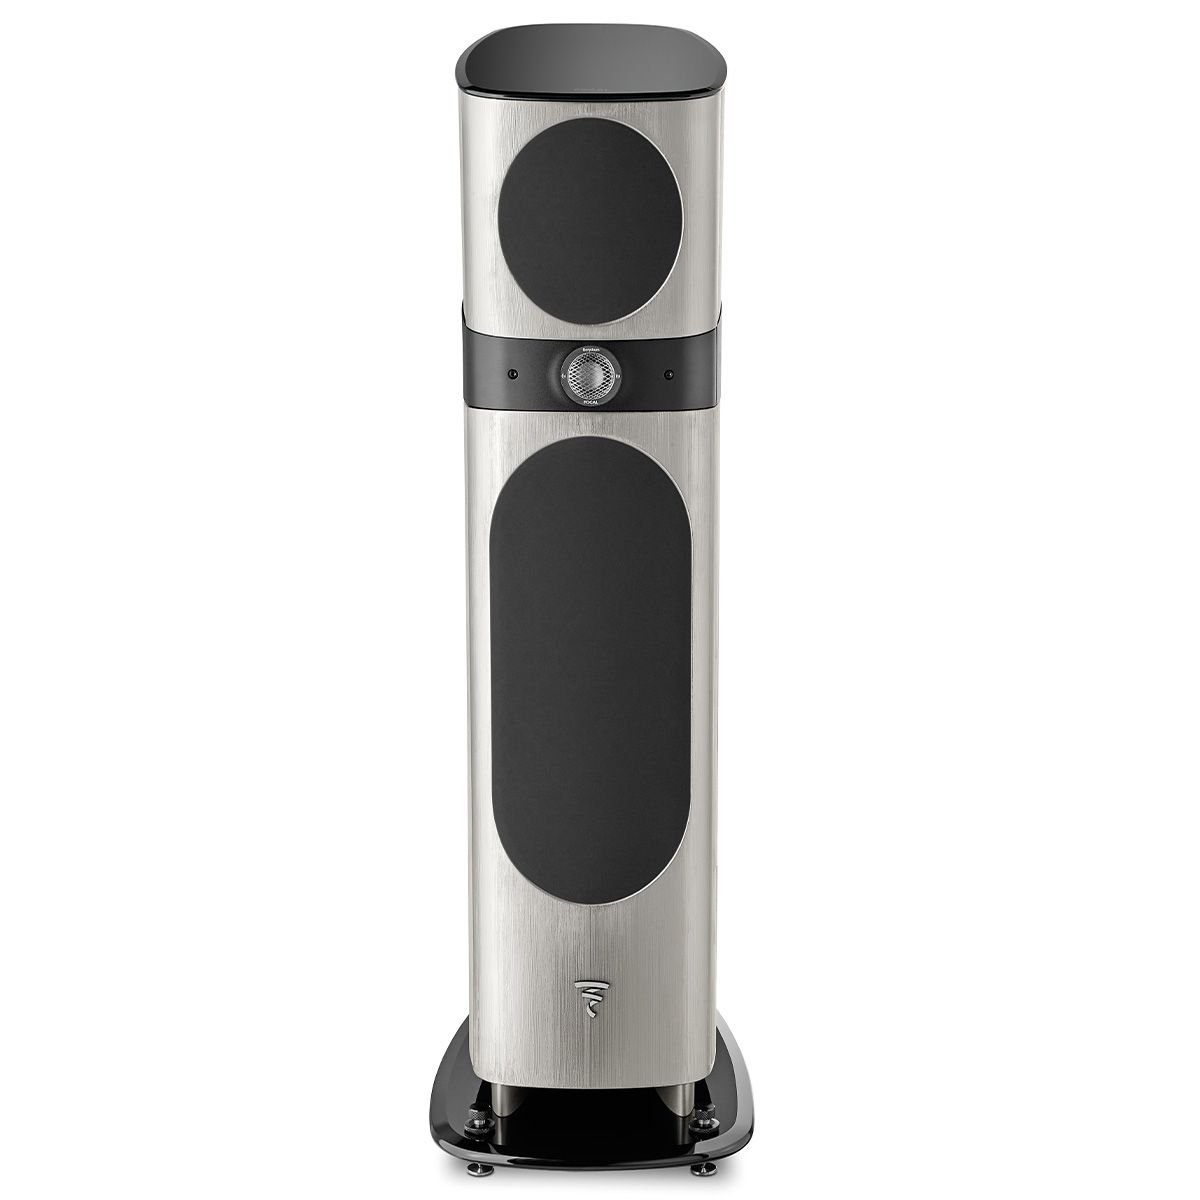 Focal Naim 10th Anniversary Edition Bundle - front view of Focal speaker with grille